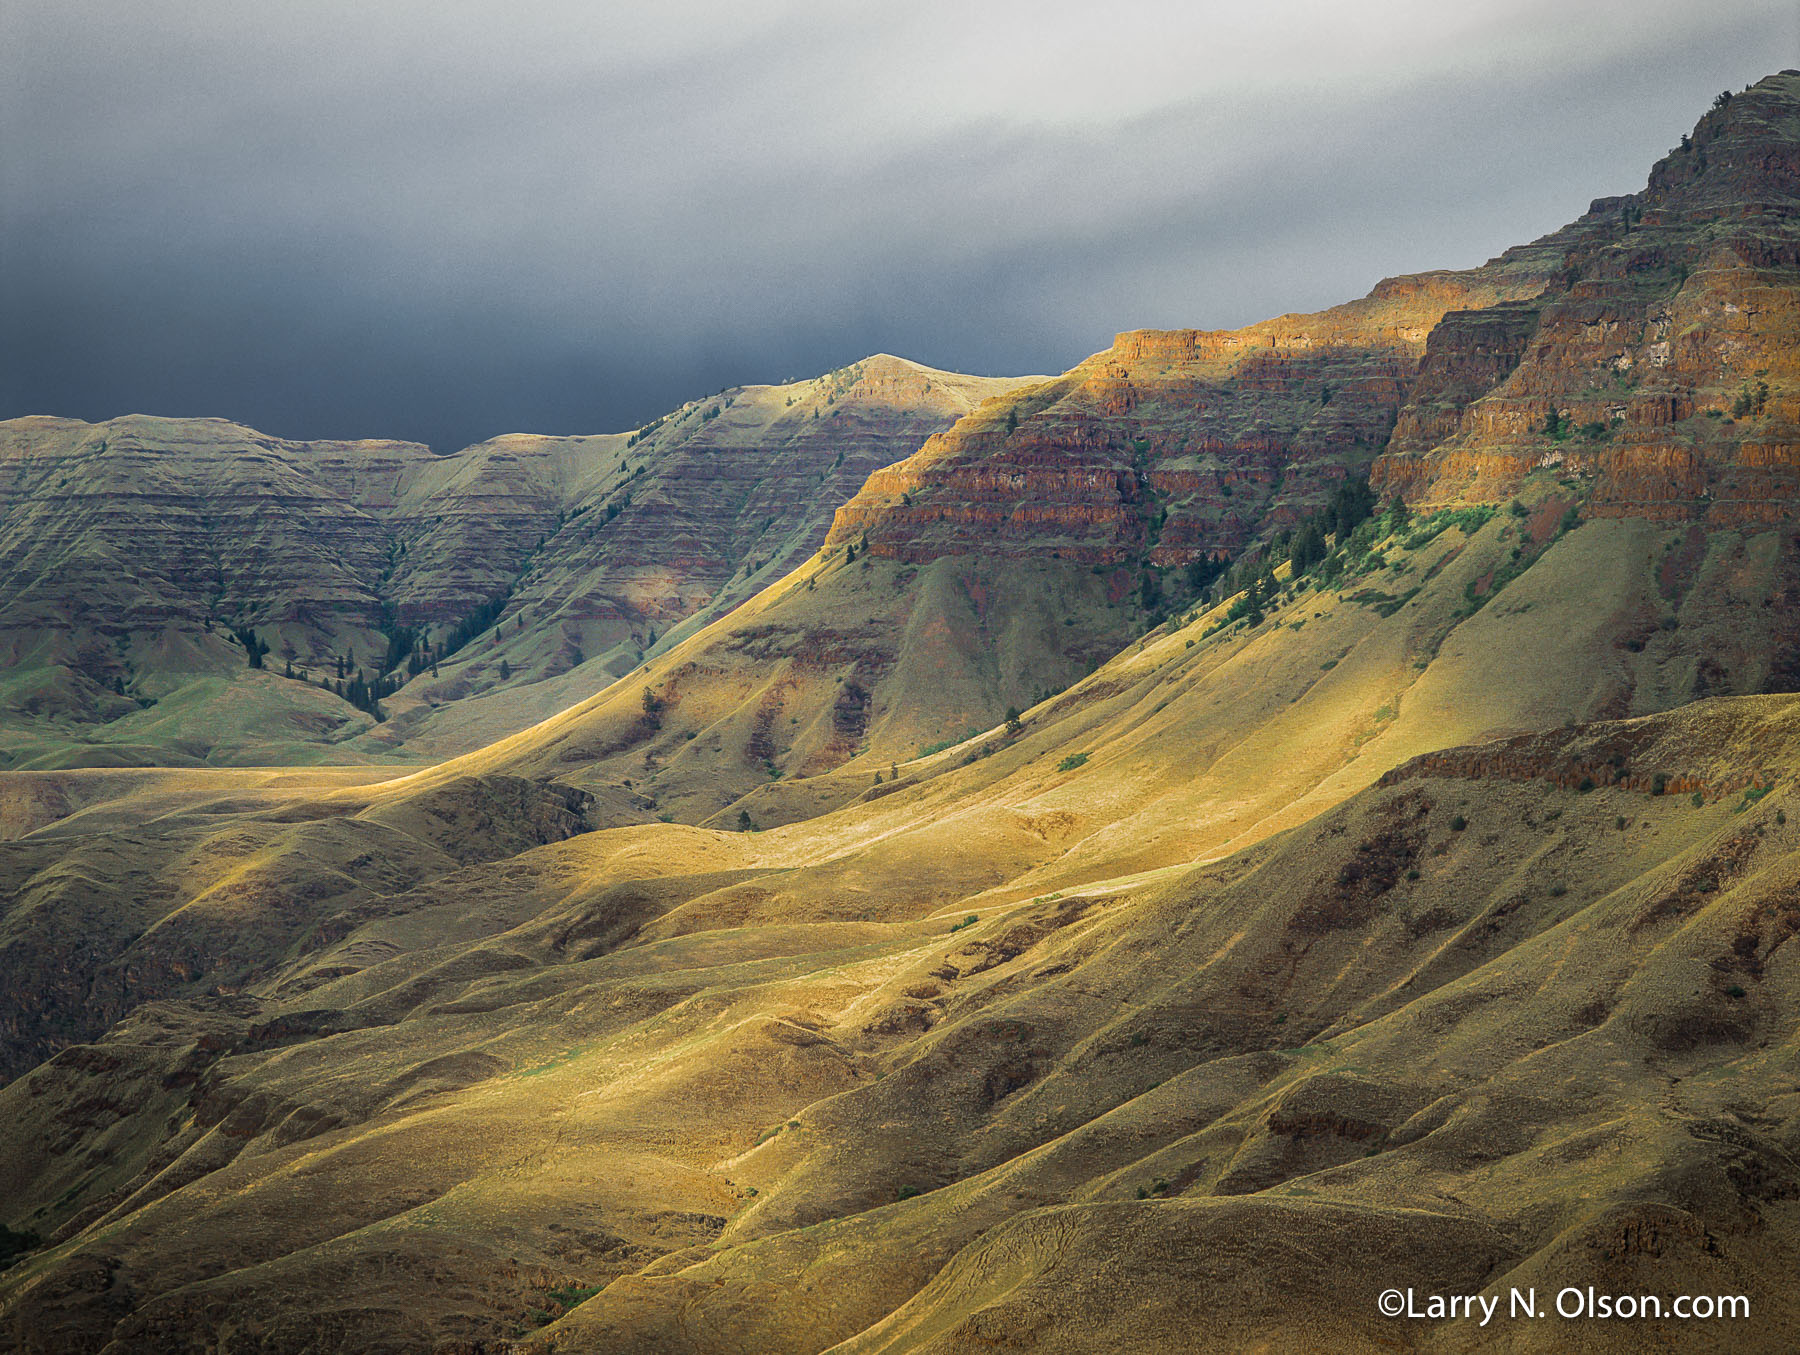 Imnaha River Canyon, OR | The illusive storm-light creates a vivid landscape in the Oregon High Desert. The basalt canyon slopes have a velvet look with the new growth of Bunchgrass. Hells canyon and the Snake River is just over the ridgeline.